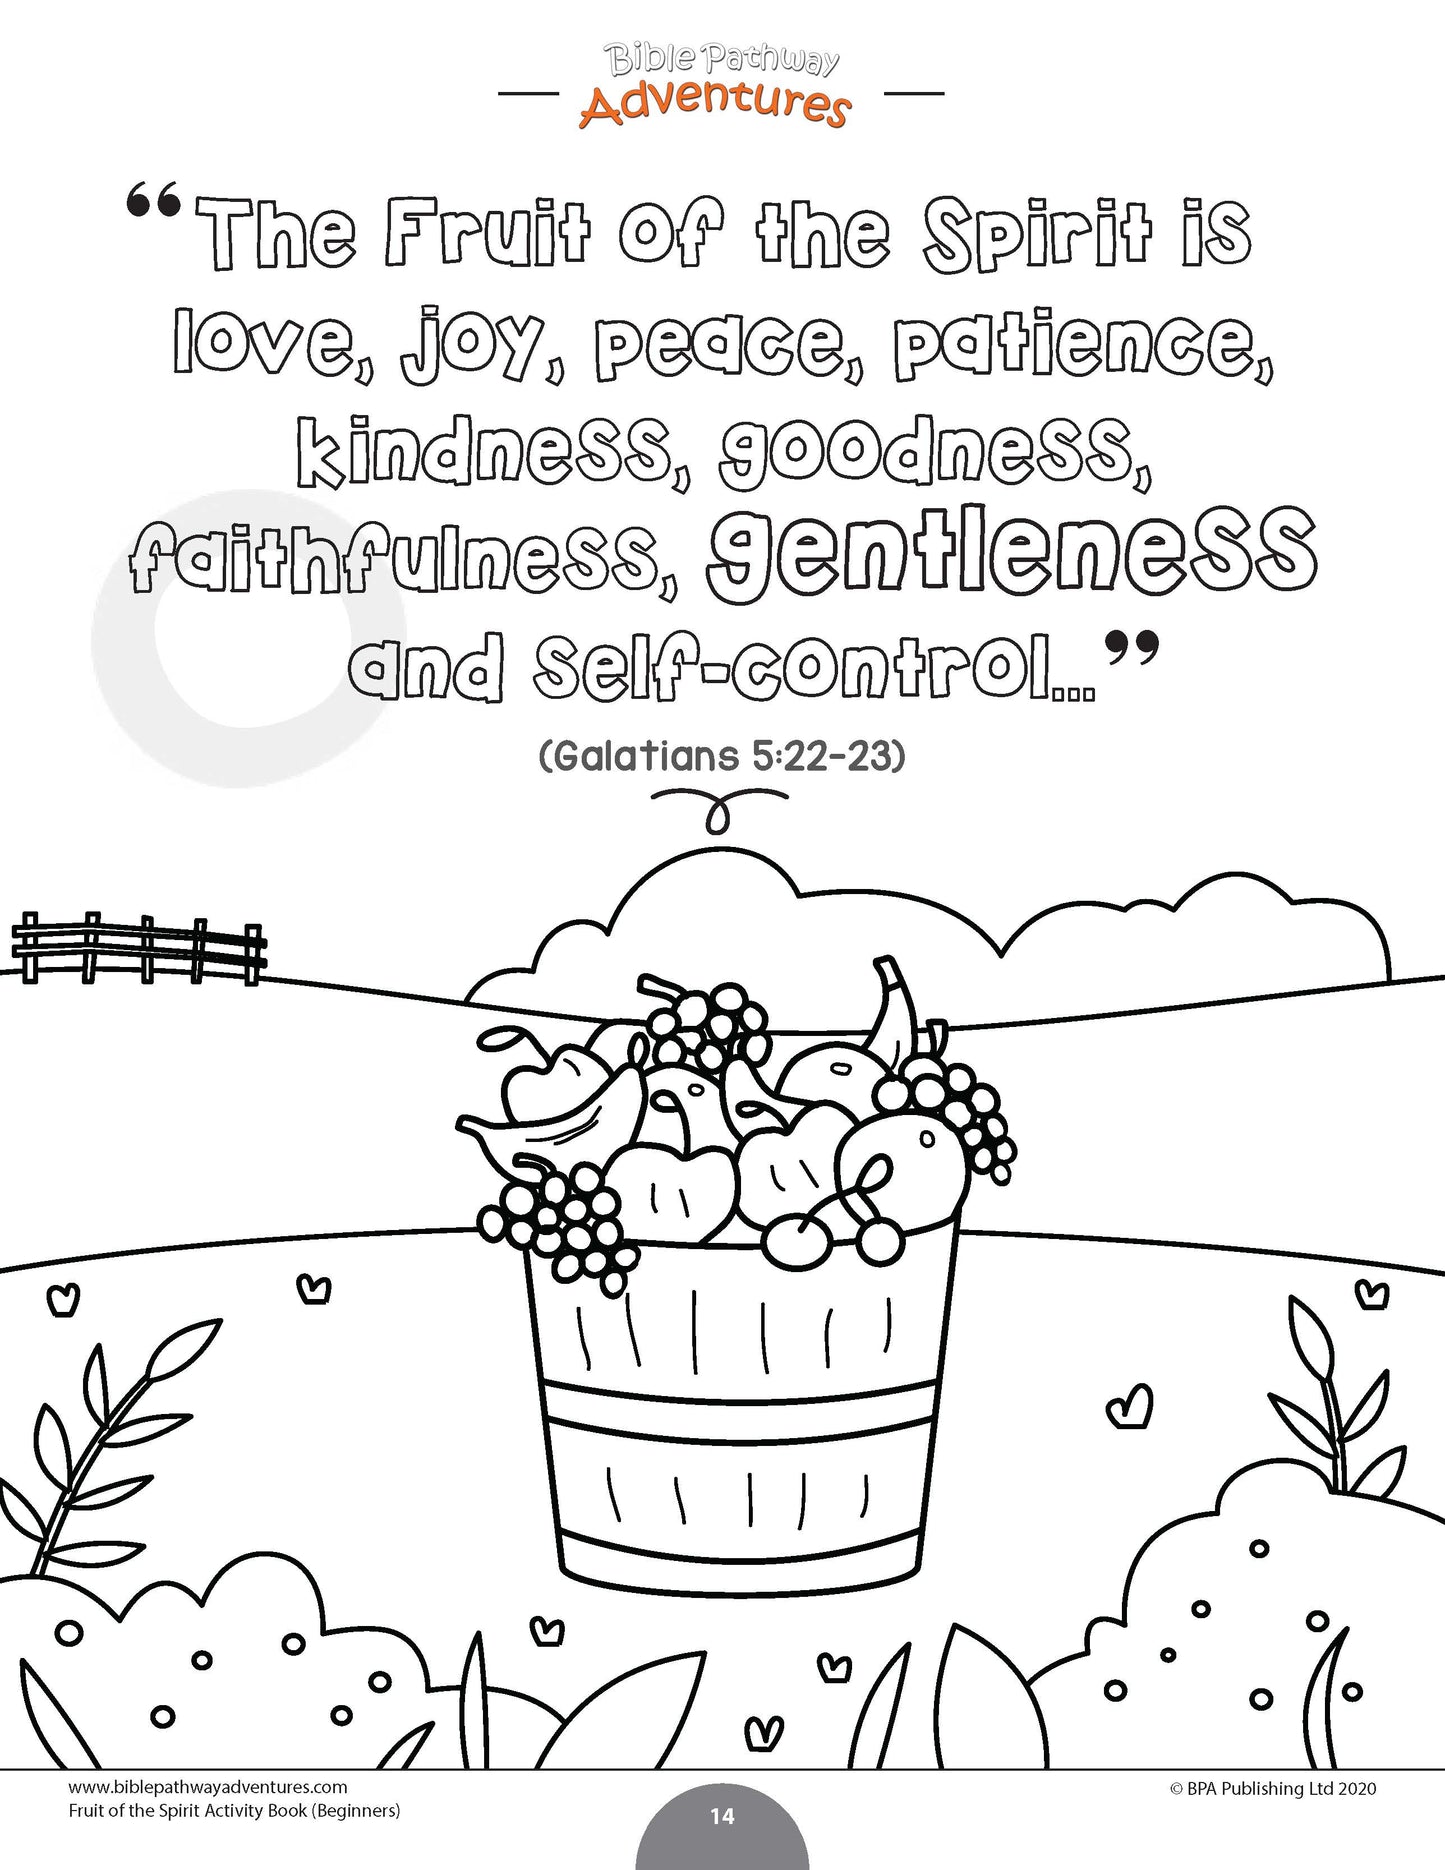 Gentleness: Fruit of the Spirit Activity Book for Beginners (PDF)